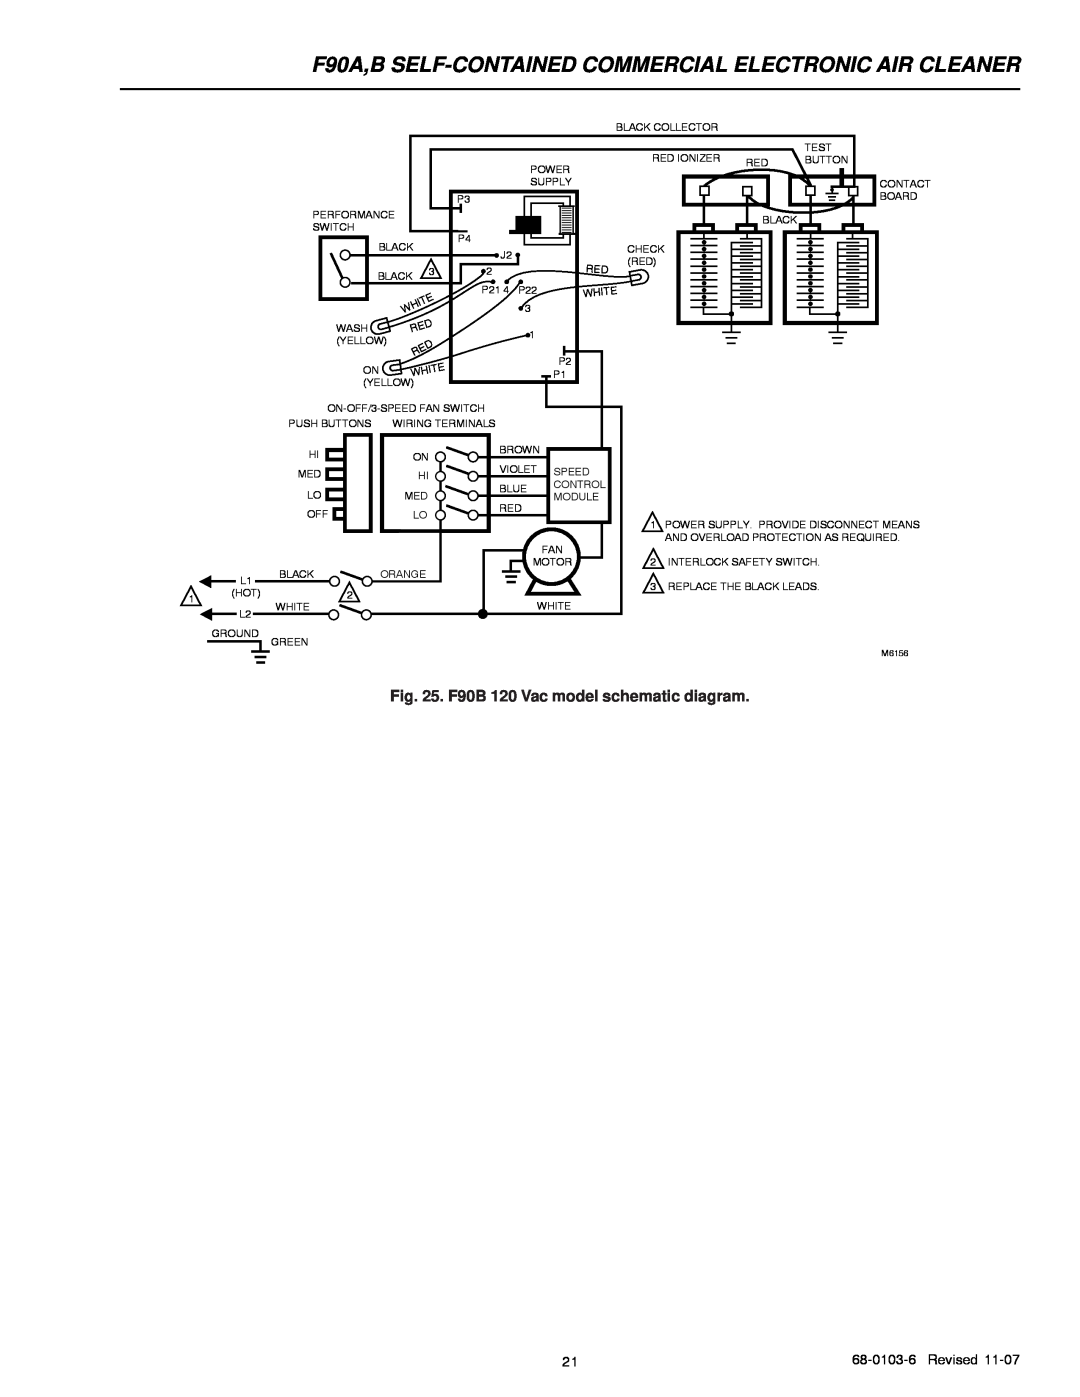 Honeywell F90A specifications F90B 120 Vac model schematic diagram, 68-0103-6Revised 